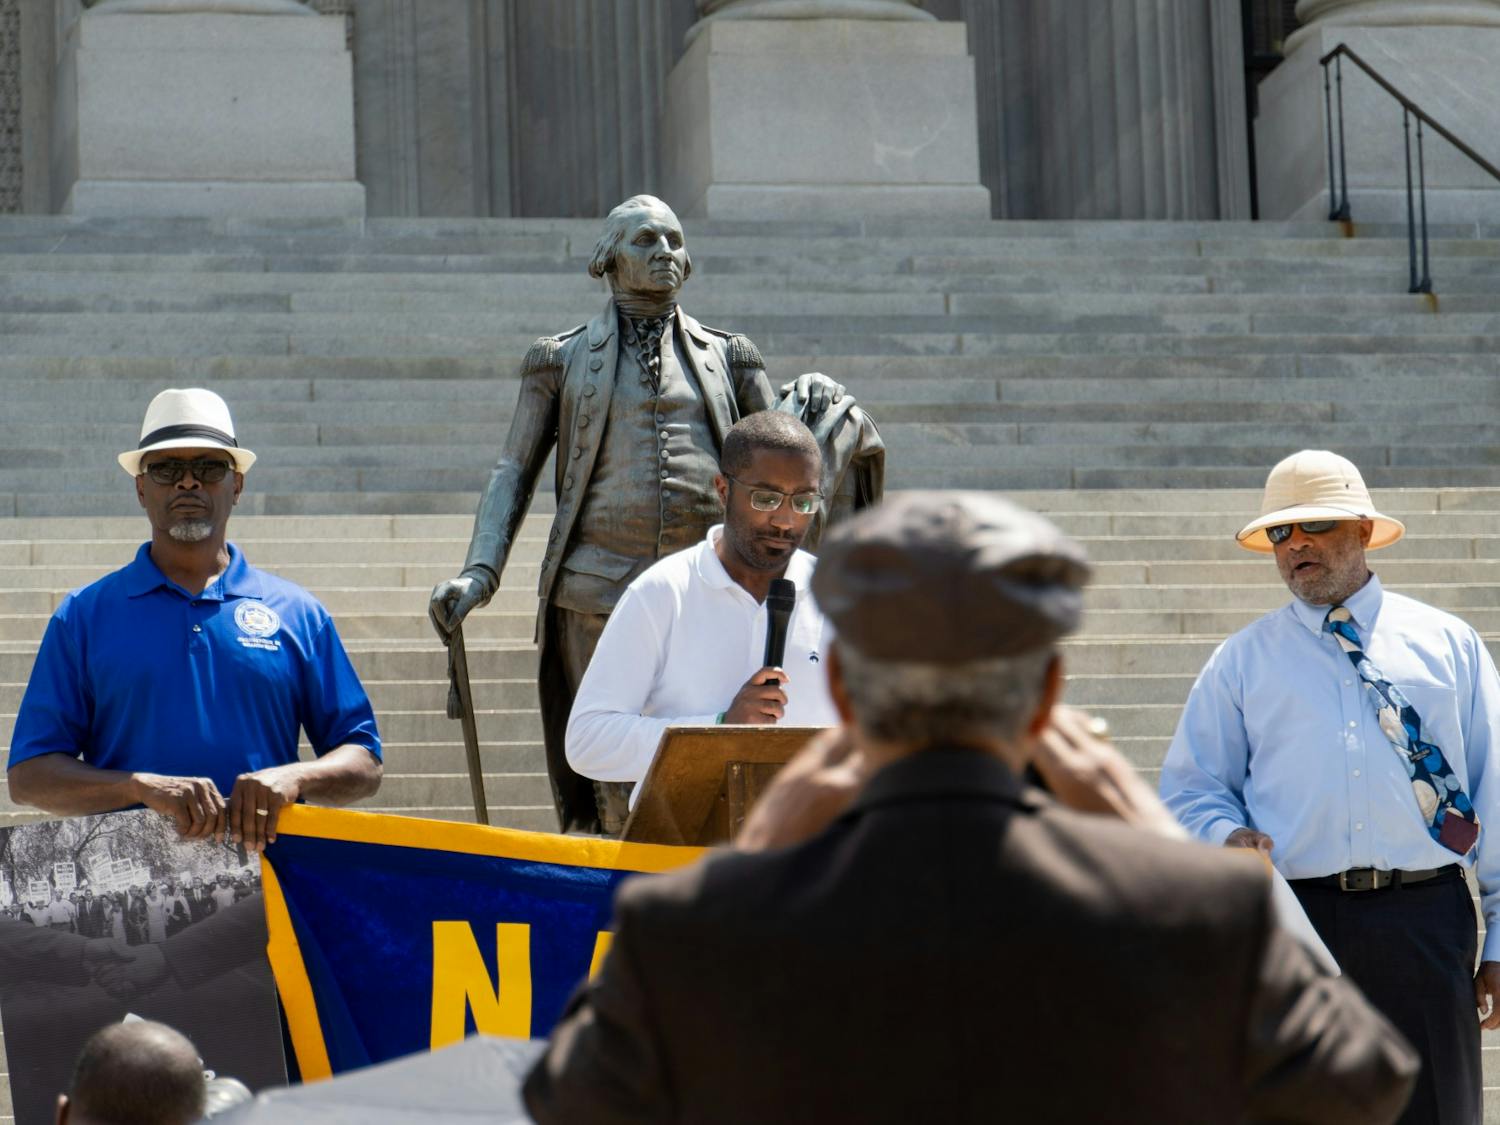 The South Carolina State Conference of the NAACP held a rally on April 23, 2022, to oppose the death penalty. The rally aimed save convicted citizens like Richard Moore from being inhumanely put to death in U.S prisons. 